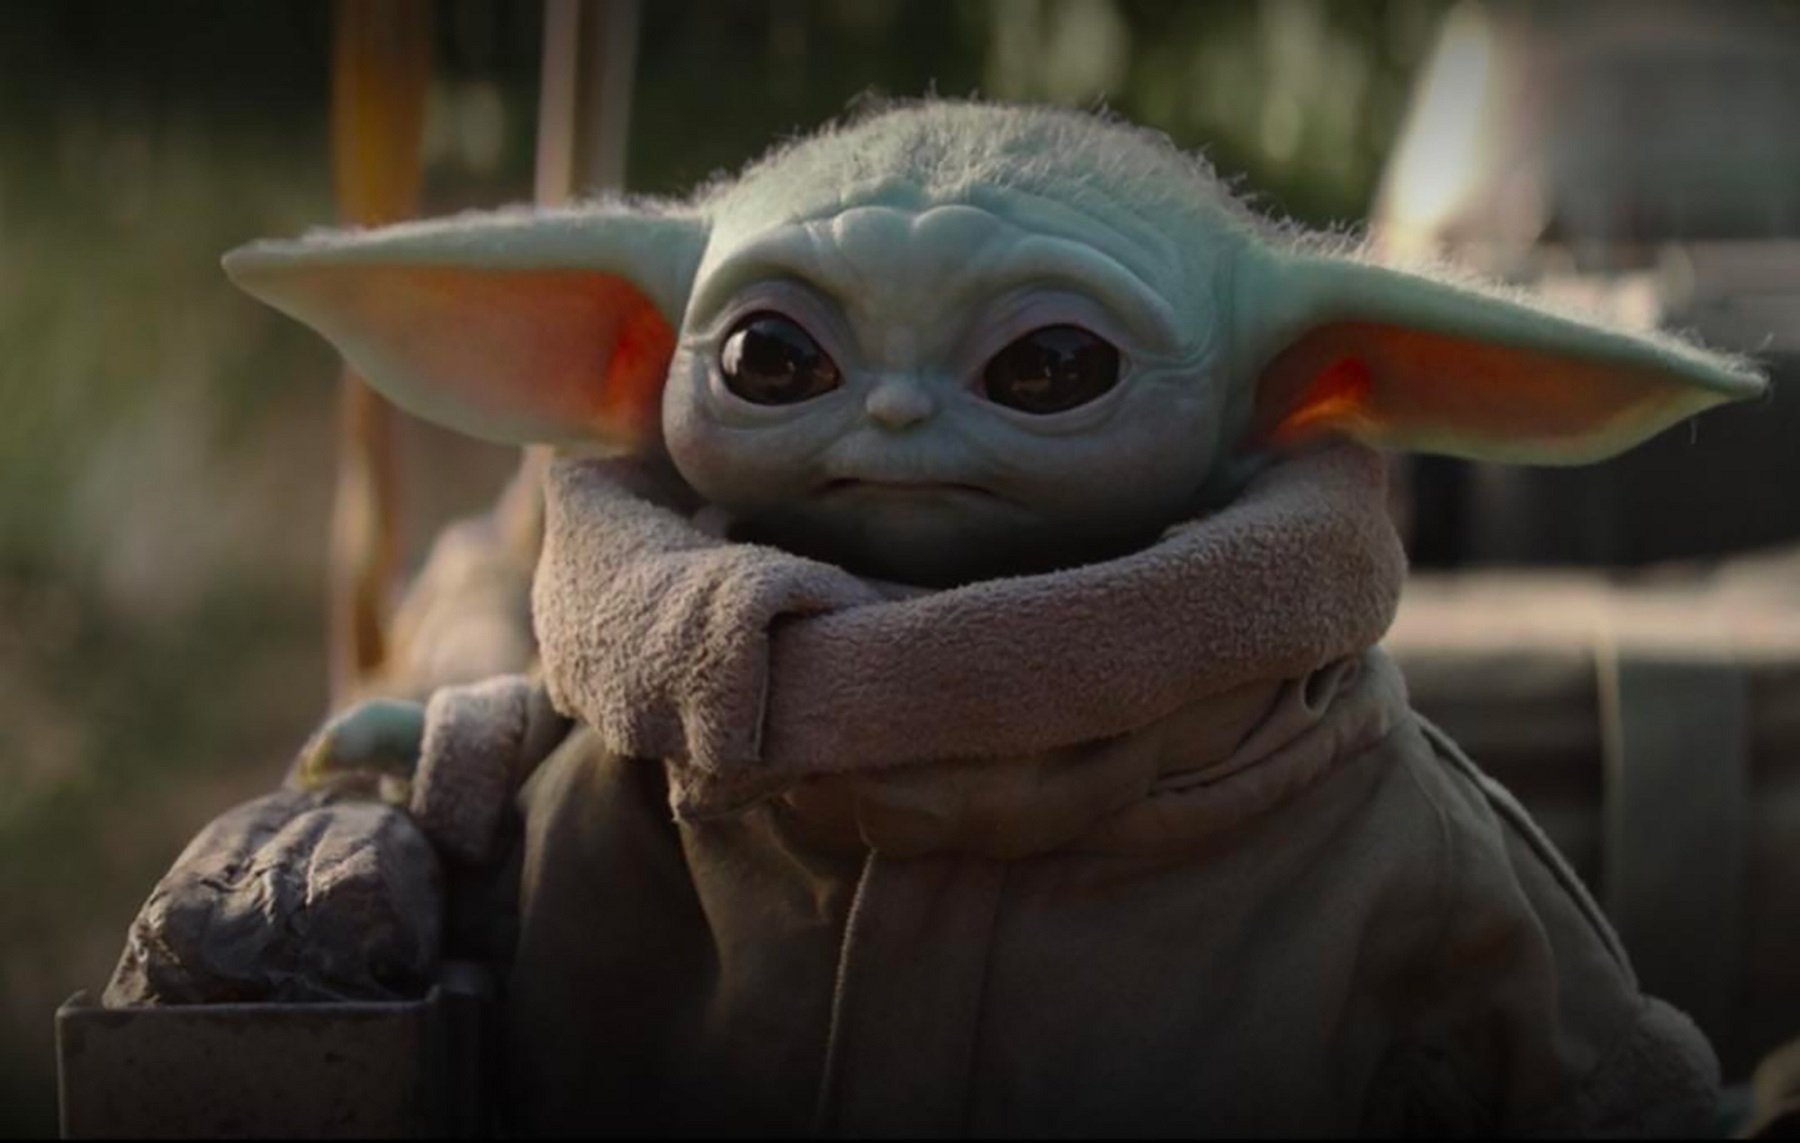 Best Baby Yoda Gifts And Merchandise